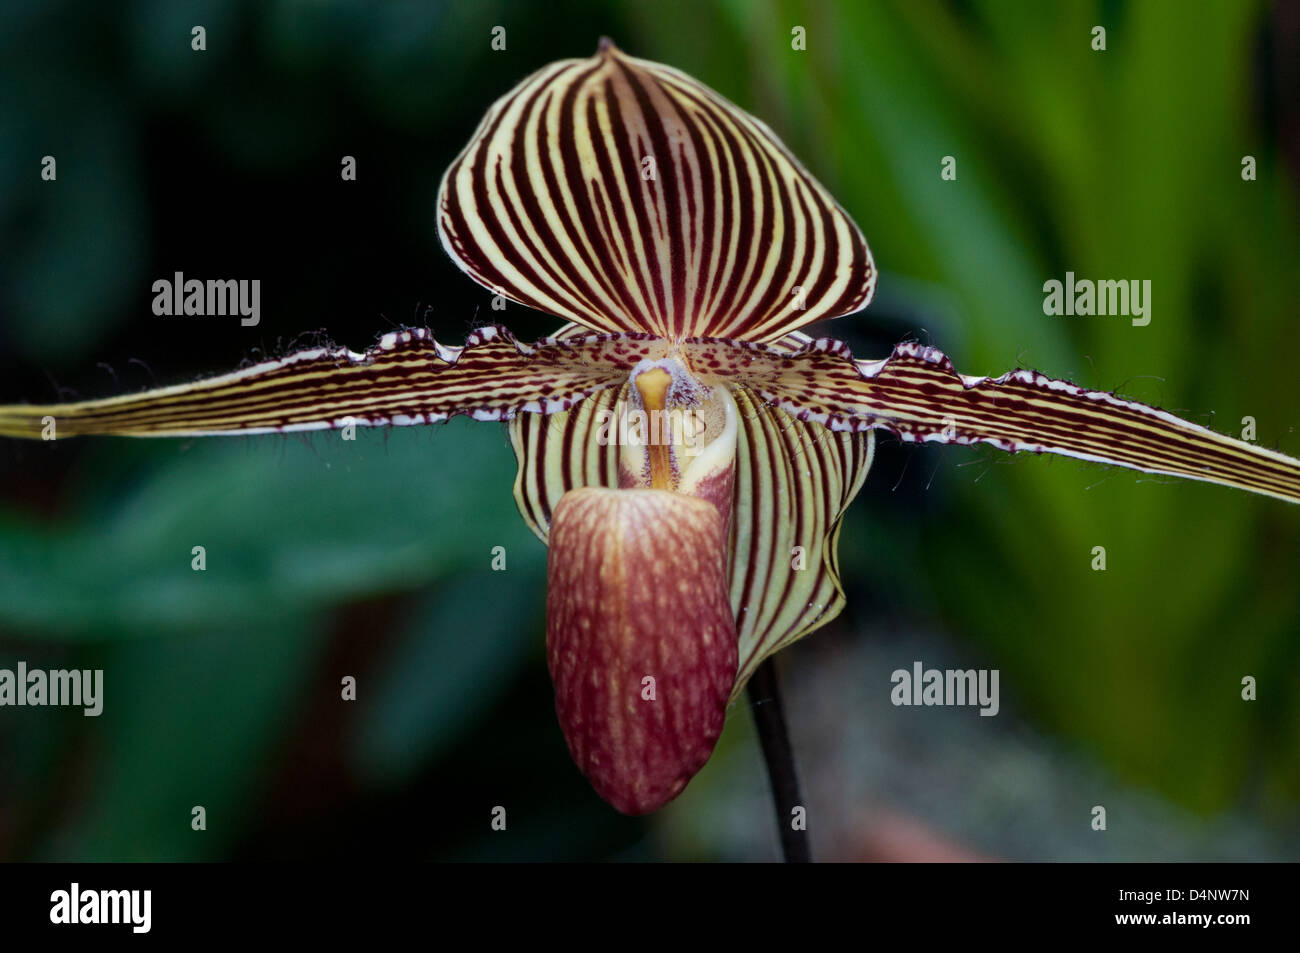 A Rothschild's slipper orchid Stock Photo